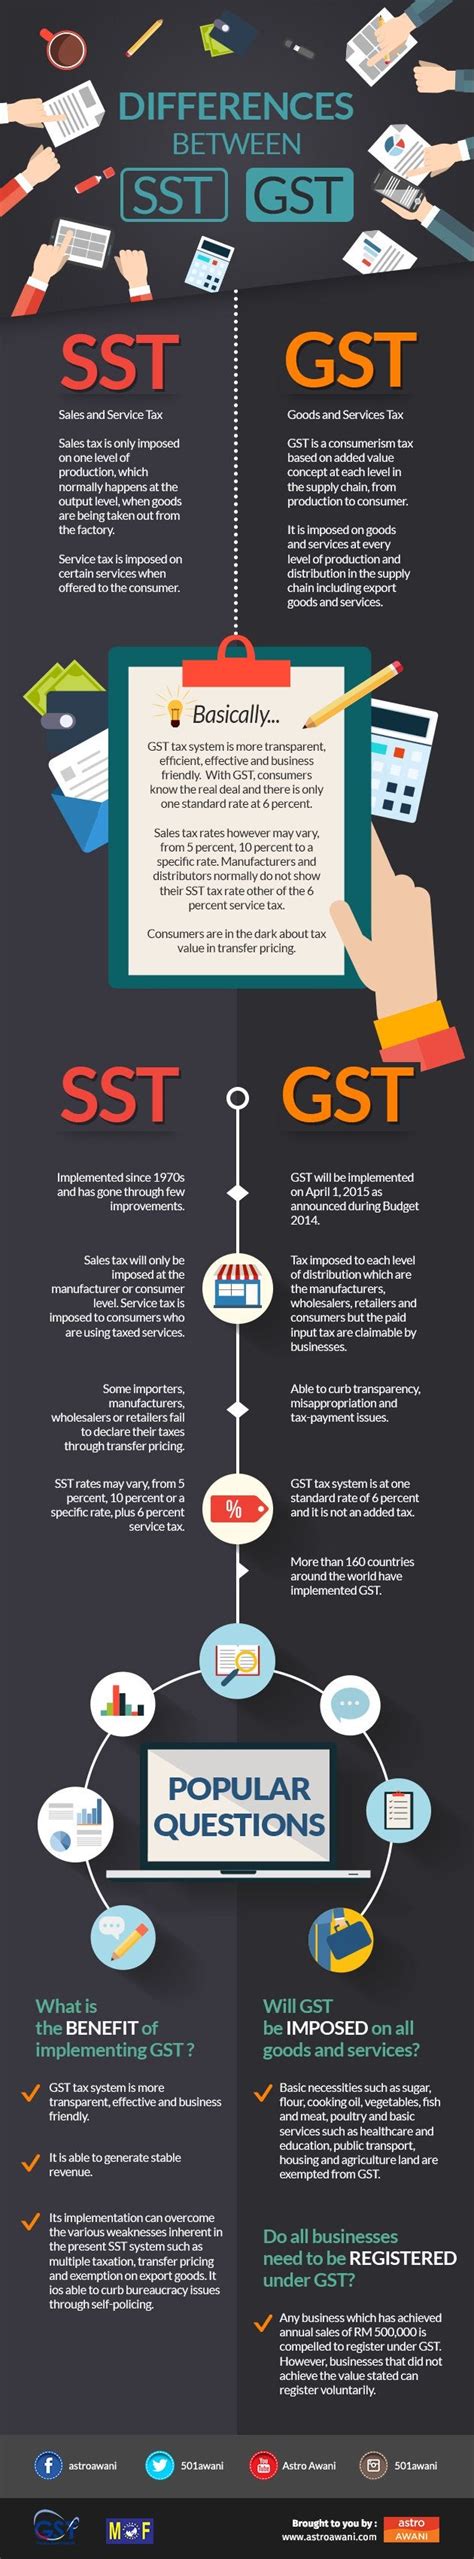 The law defined those regarded as service providers above i have explained how sales and service tax in malaysia works. The differences between GST and SST : malaysia